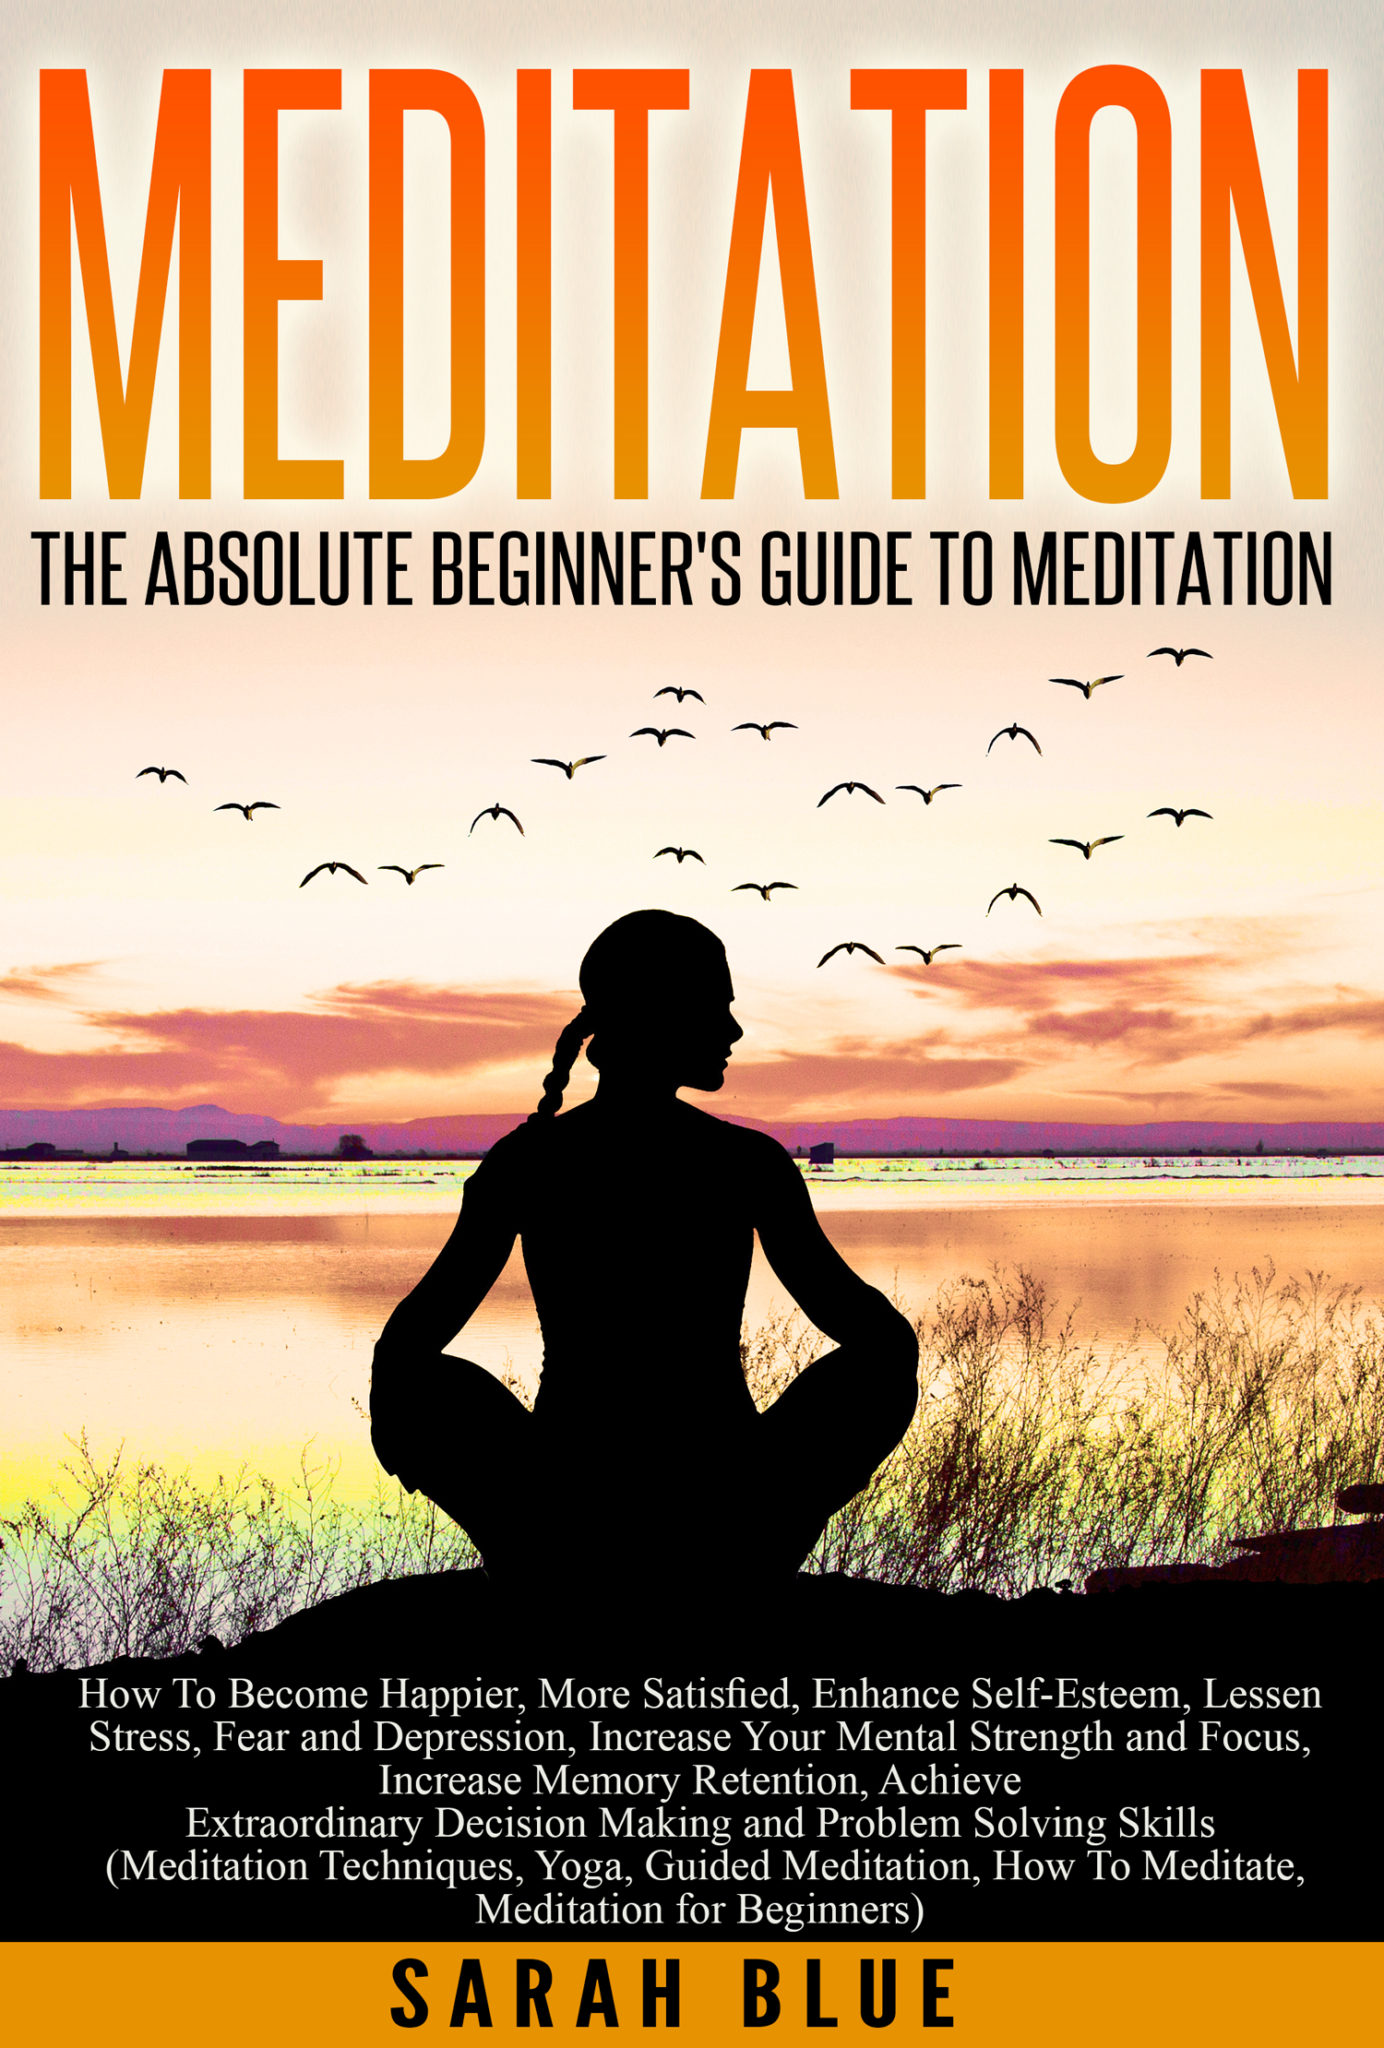 FREE: Meditation: The Absolute Beginner’s Guide to Meditation: How To Become Happier, More Satisfied, Enhance Self-Esteem, Lessen Stress, Fear and Depression by Sarah Blue